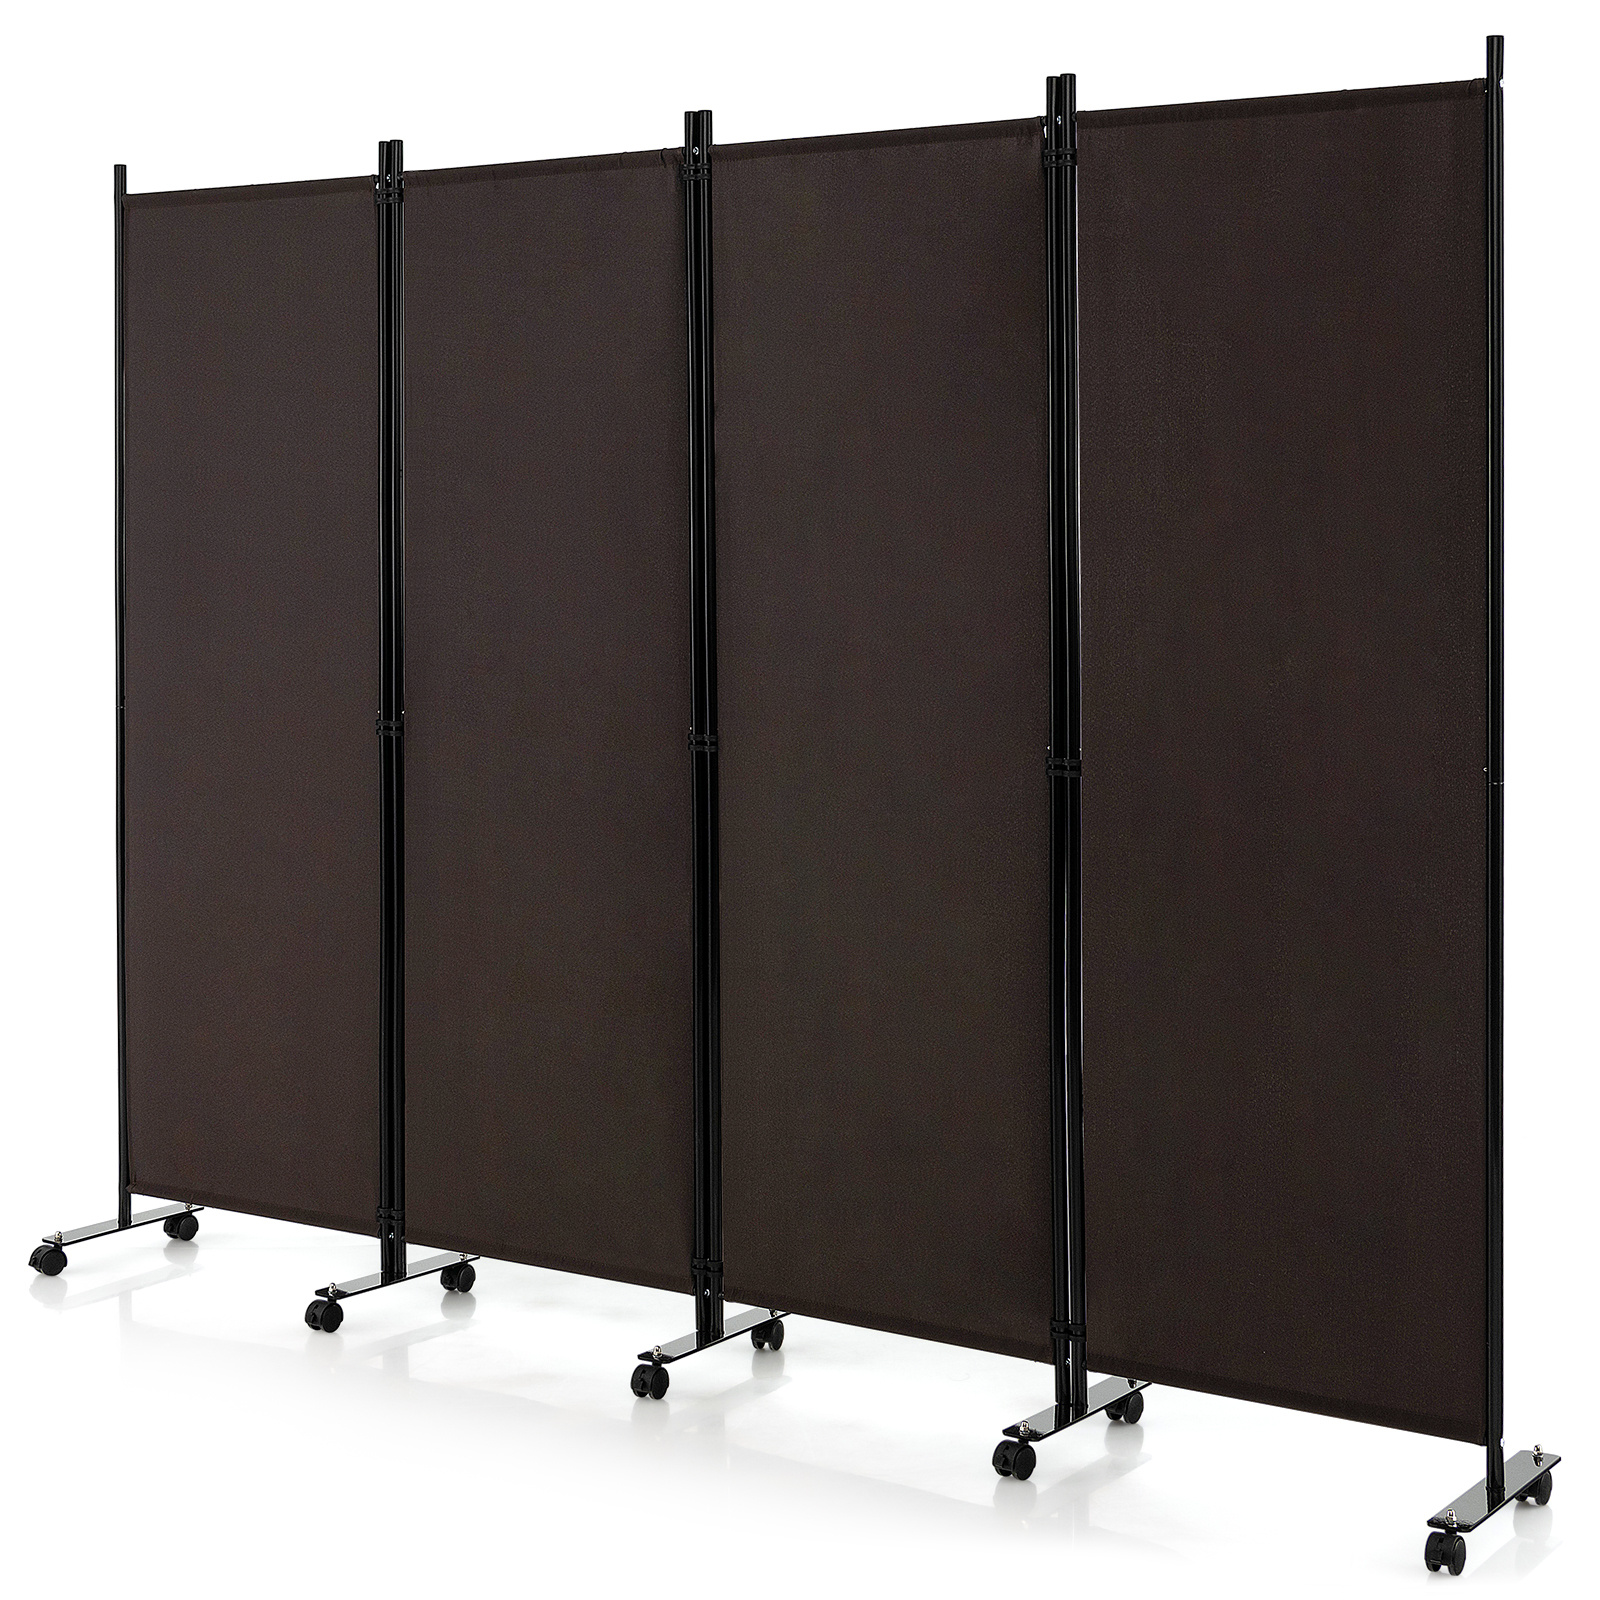 

Maxmass 4-panel Folding Room Divider 6ft Rolling Privacy Screen W/ Lockable Wheels Brown